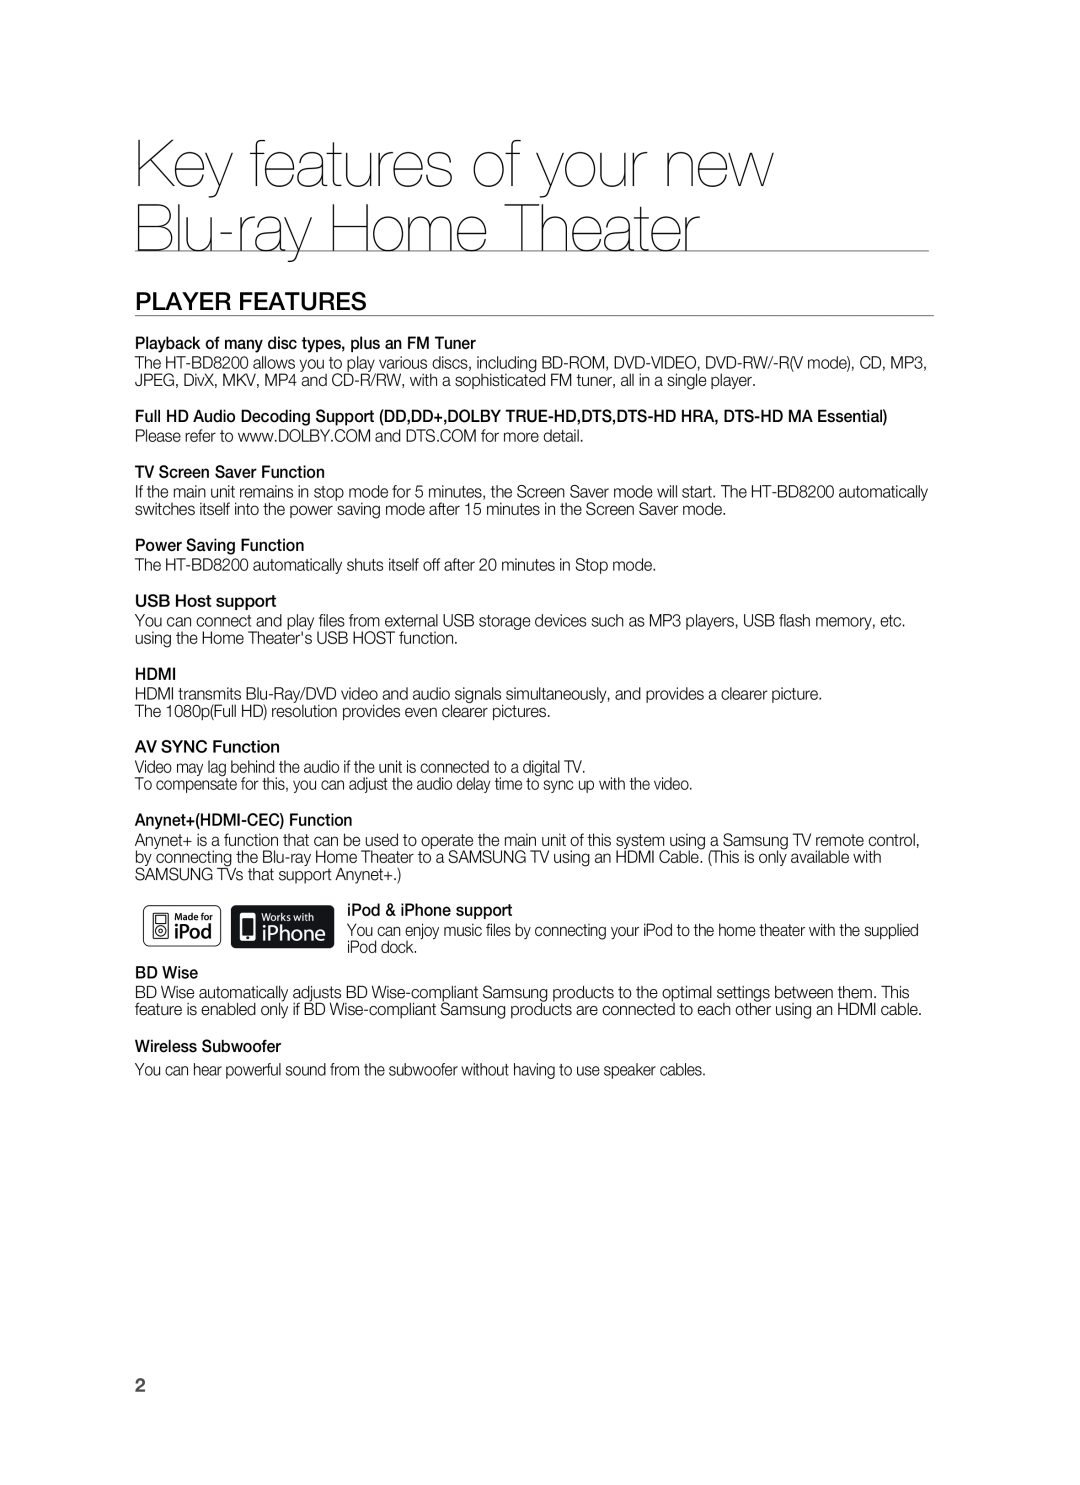 Samsung HT-BD8200 user manual Key features of your new Blu-rayHome Theater, Player Features 